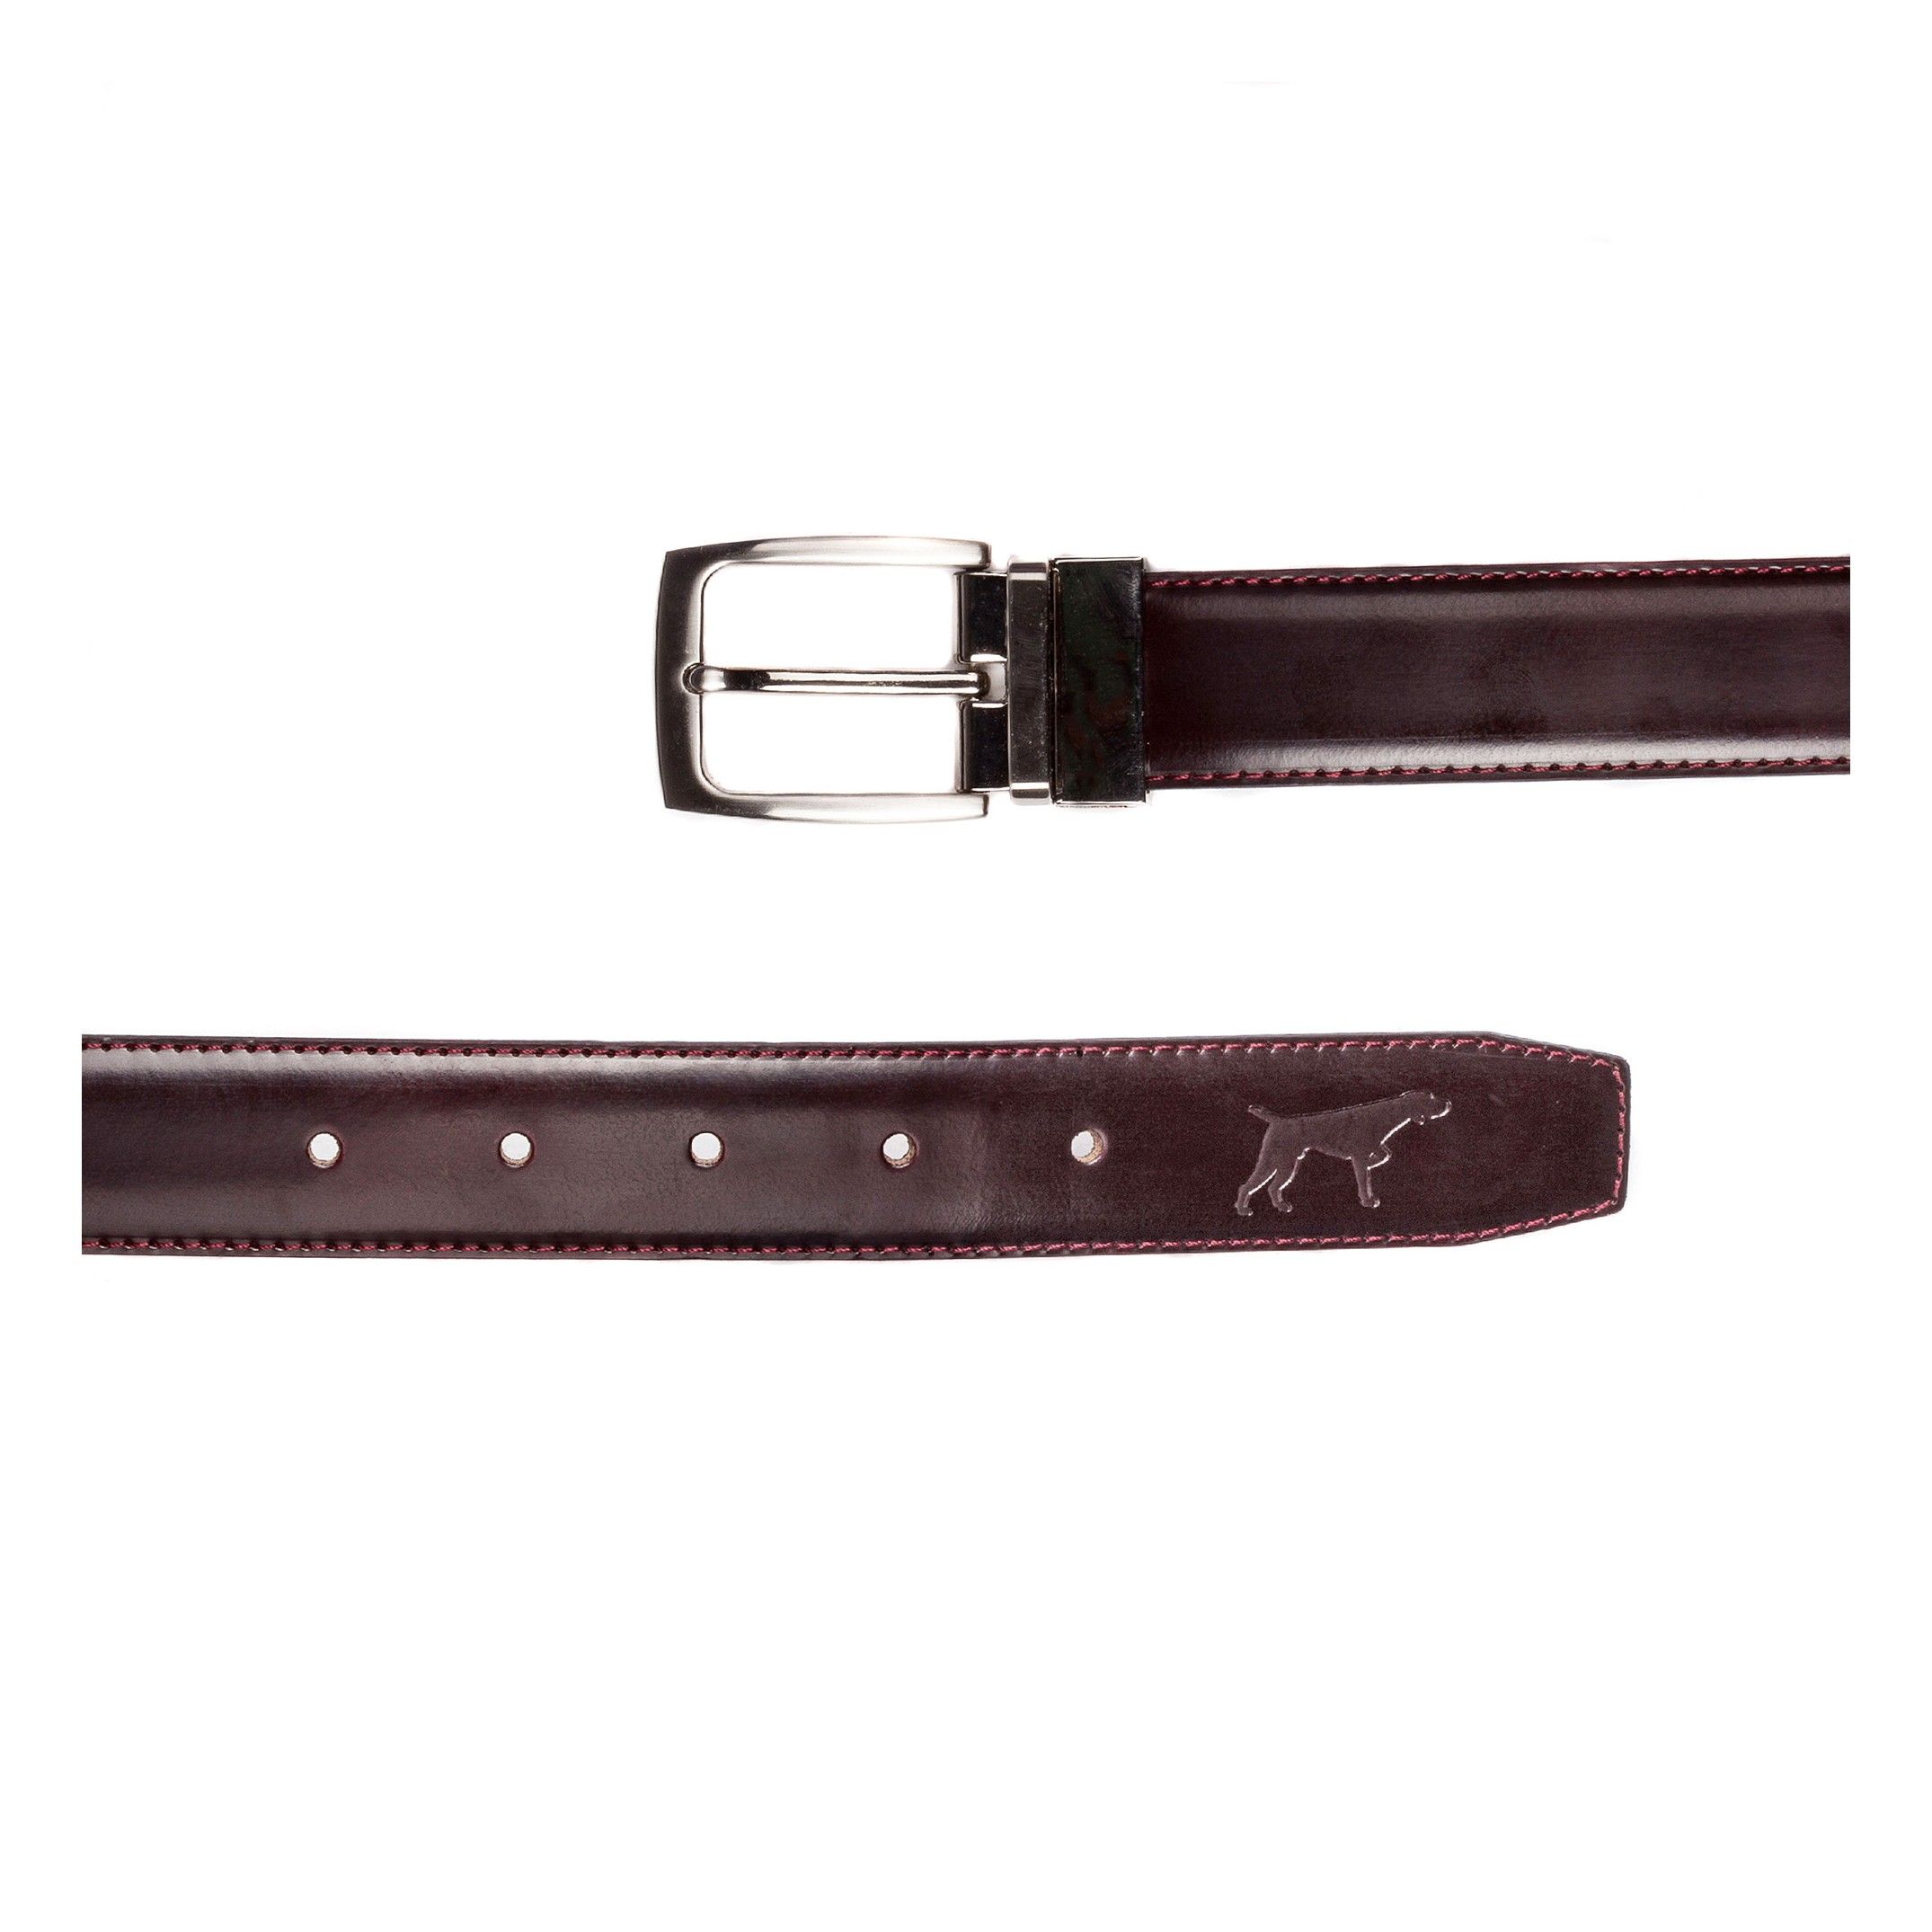 Adjustable belt. Florentic leather. Removable metal buckle to adapt the belt. Width of 3,3 cm. Large of 100 cm & 115 cm. Burgundy color. Classic style.